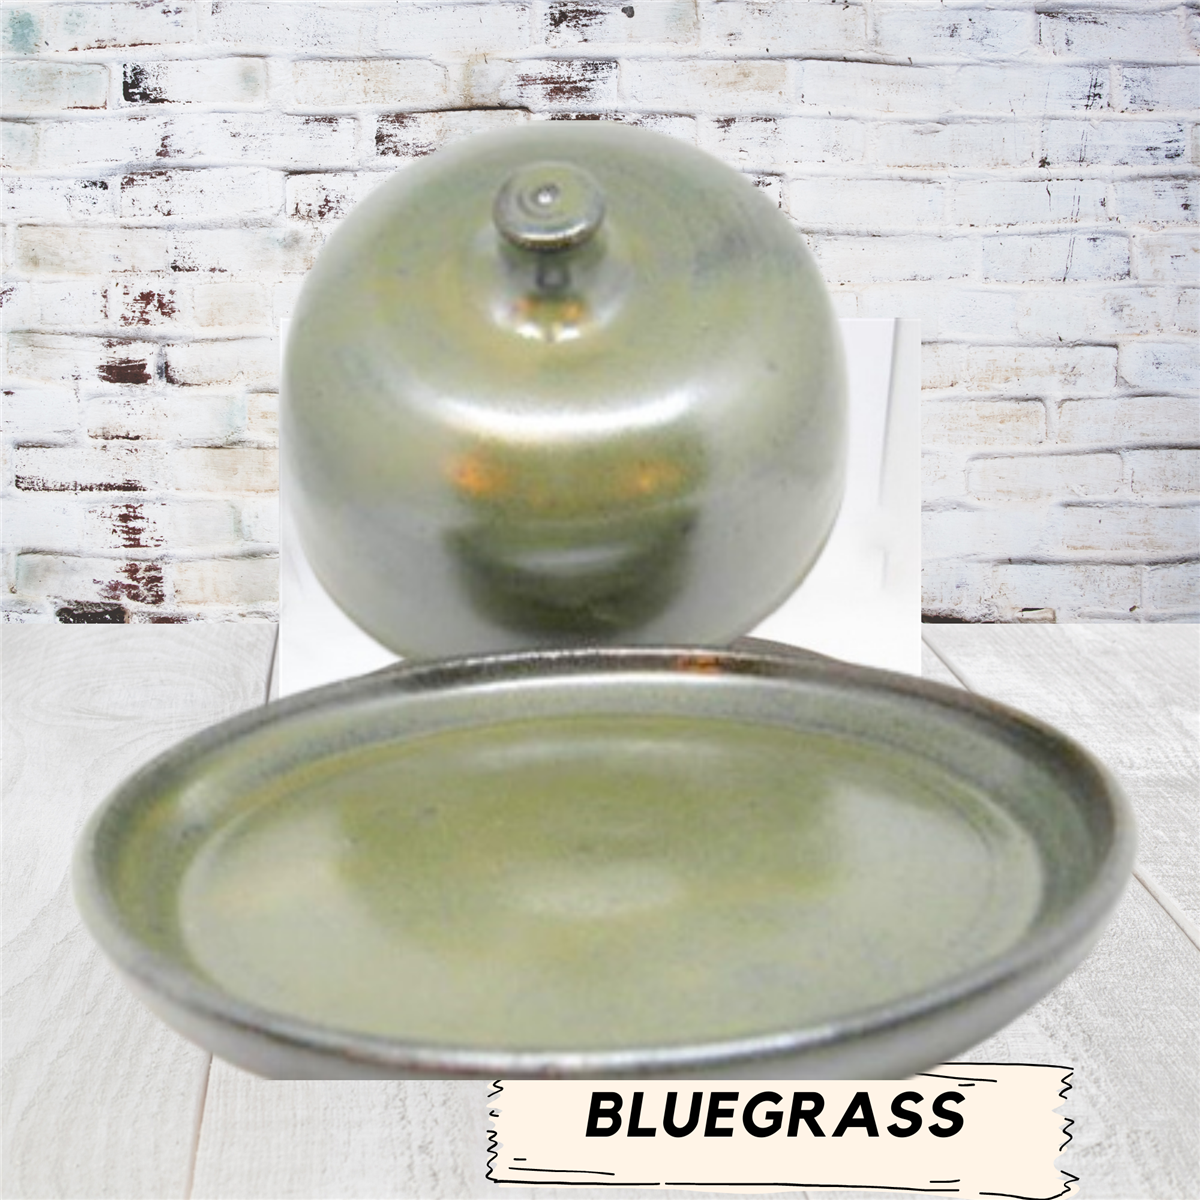 Butter dome. 2 pc set with tray. Handmade pottery covered butter dish or cheese dome